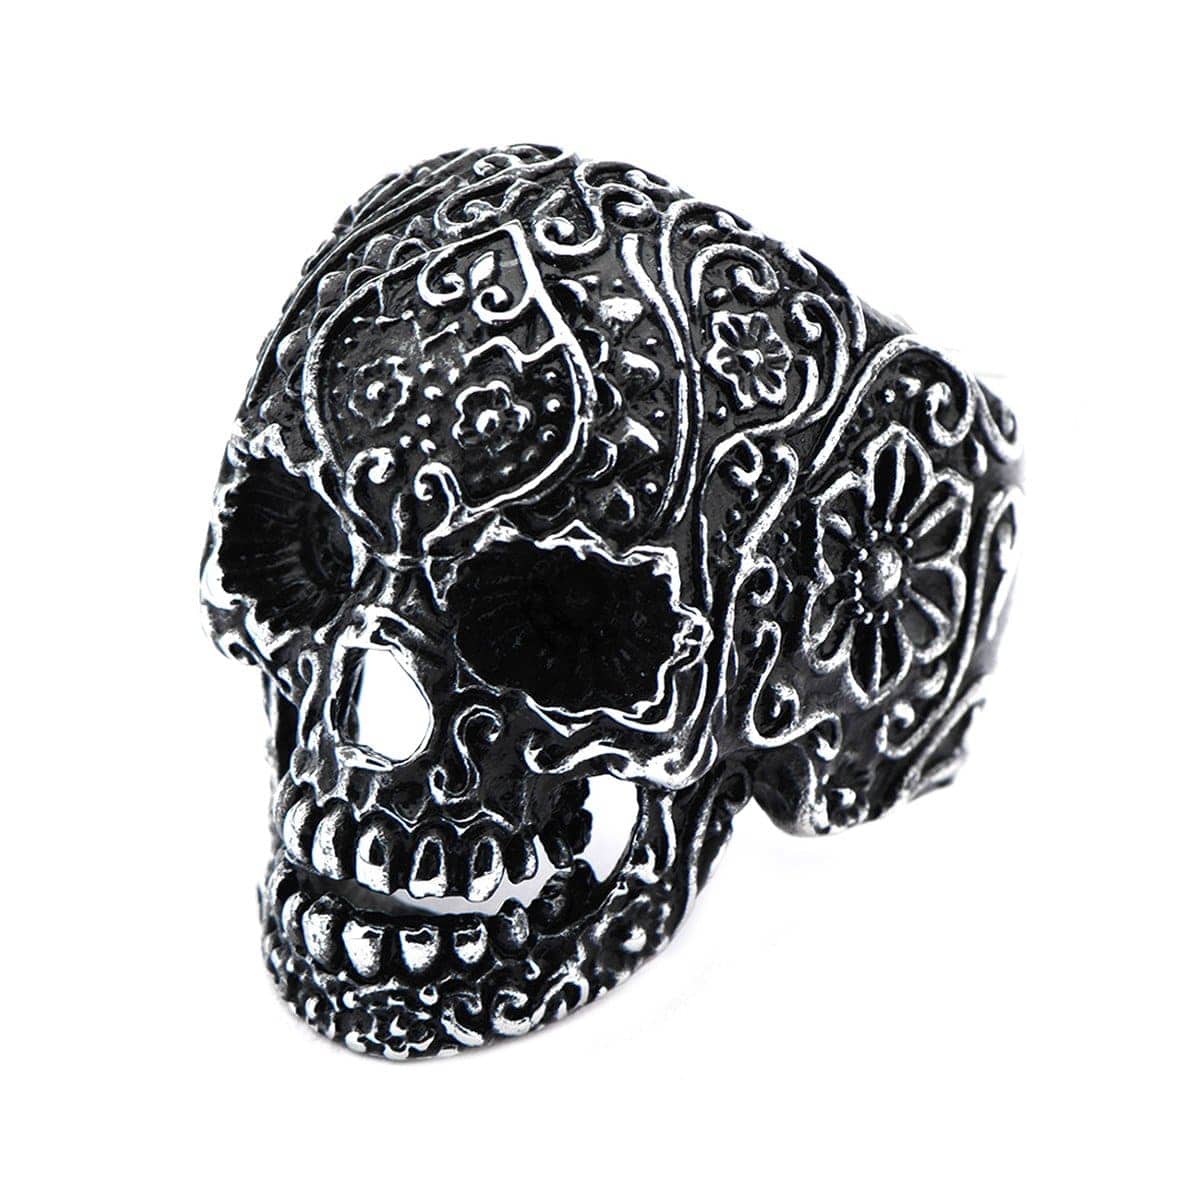 INOX JEWELRY Rings Antiqued Silver Tone Stainless Steel Full Tattooed Skull Ring